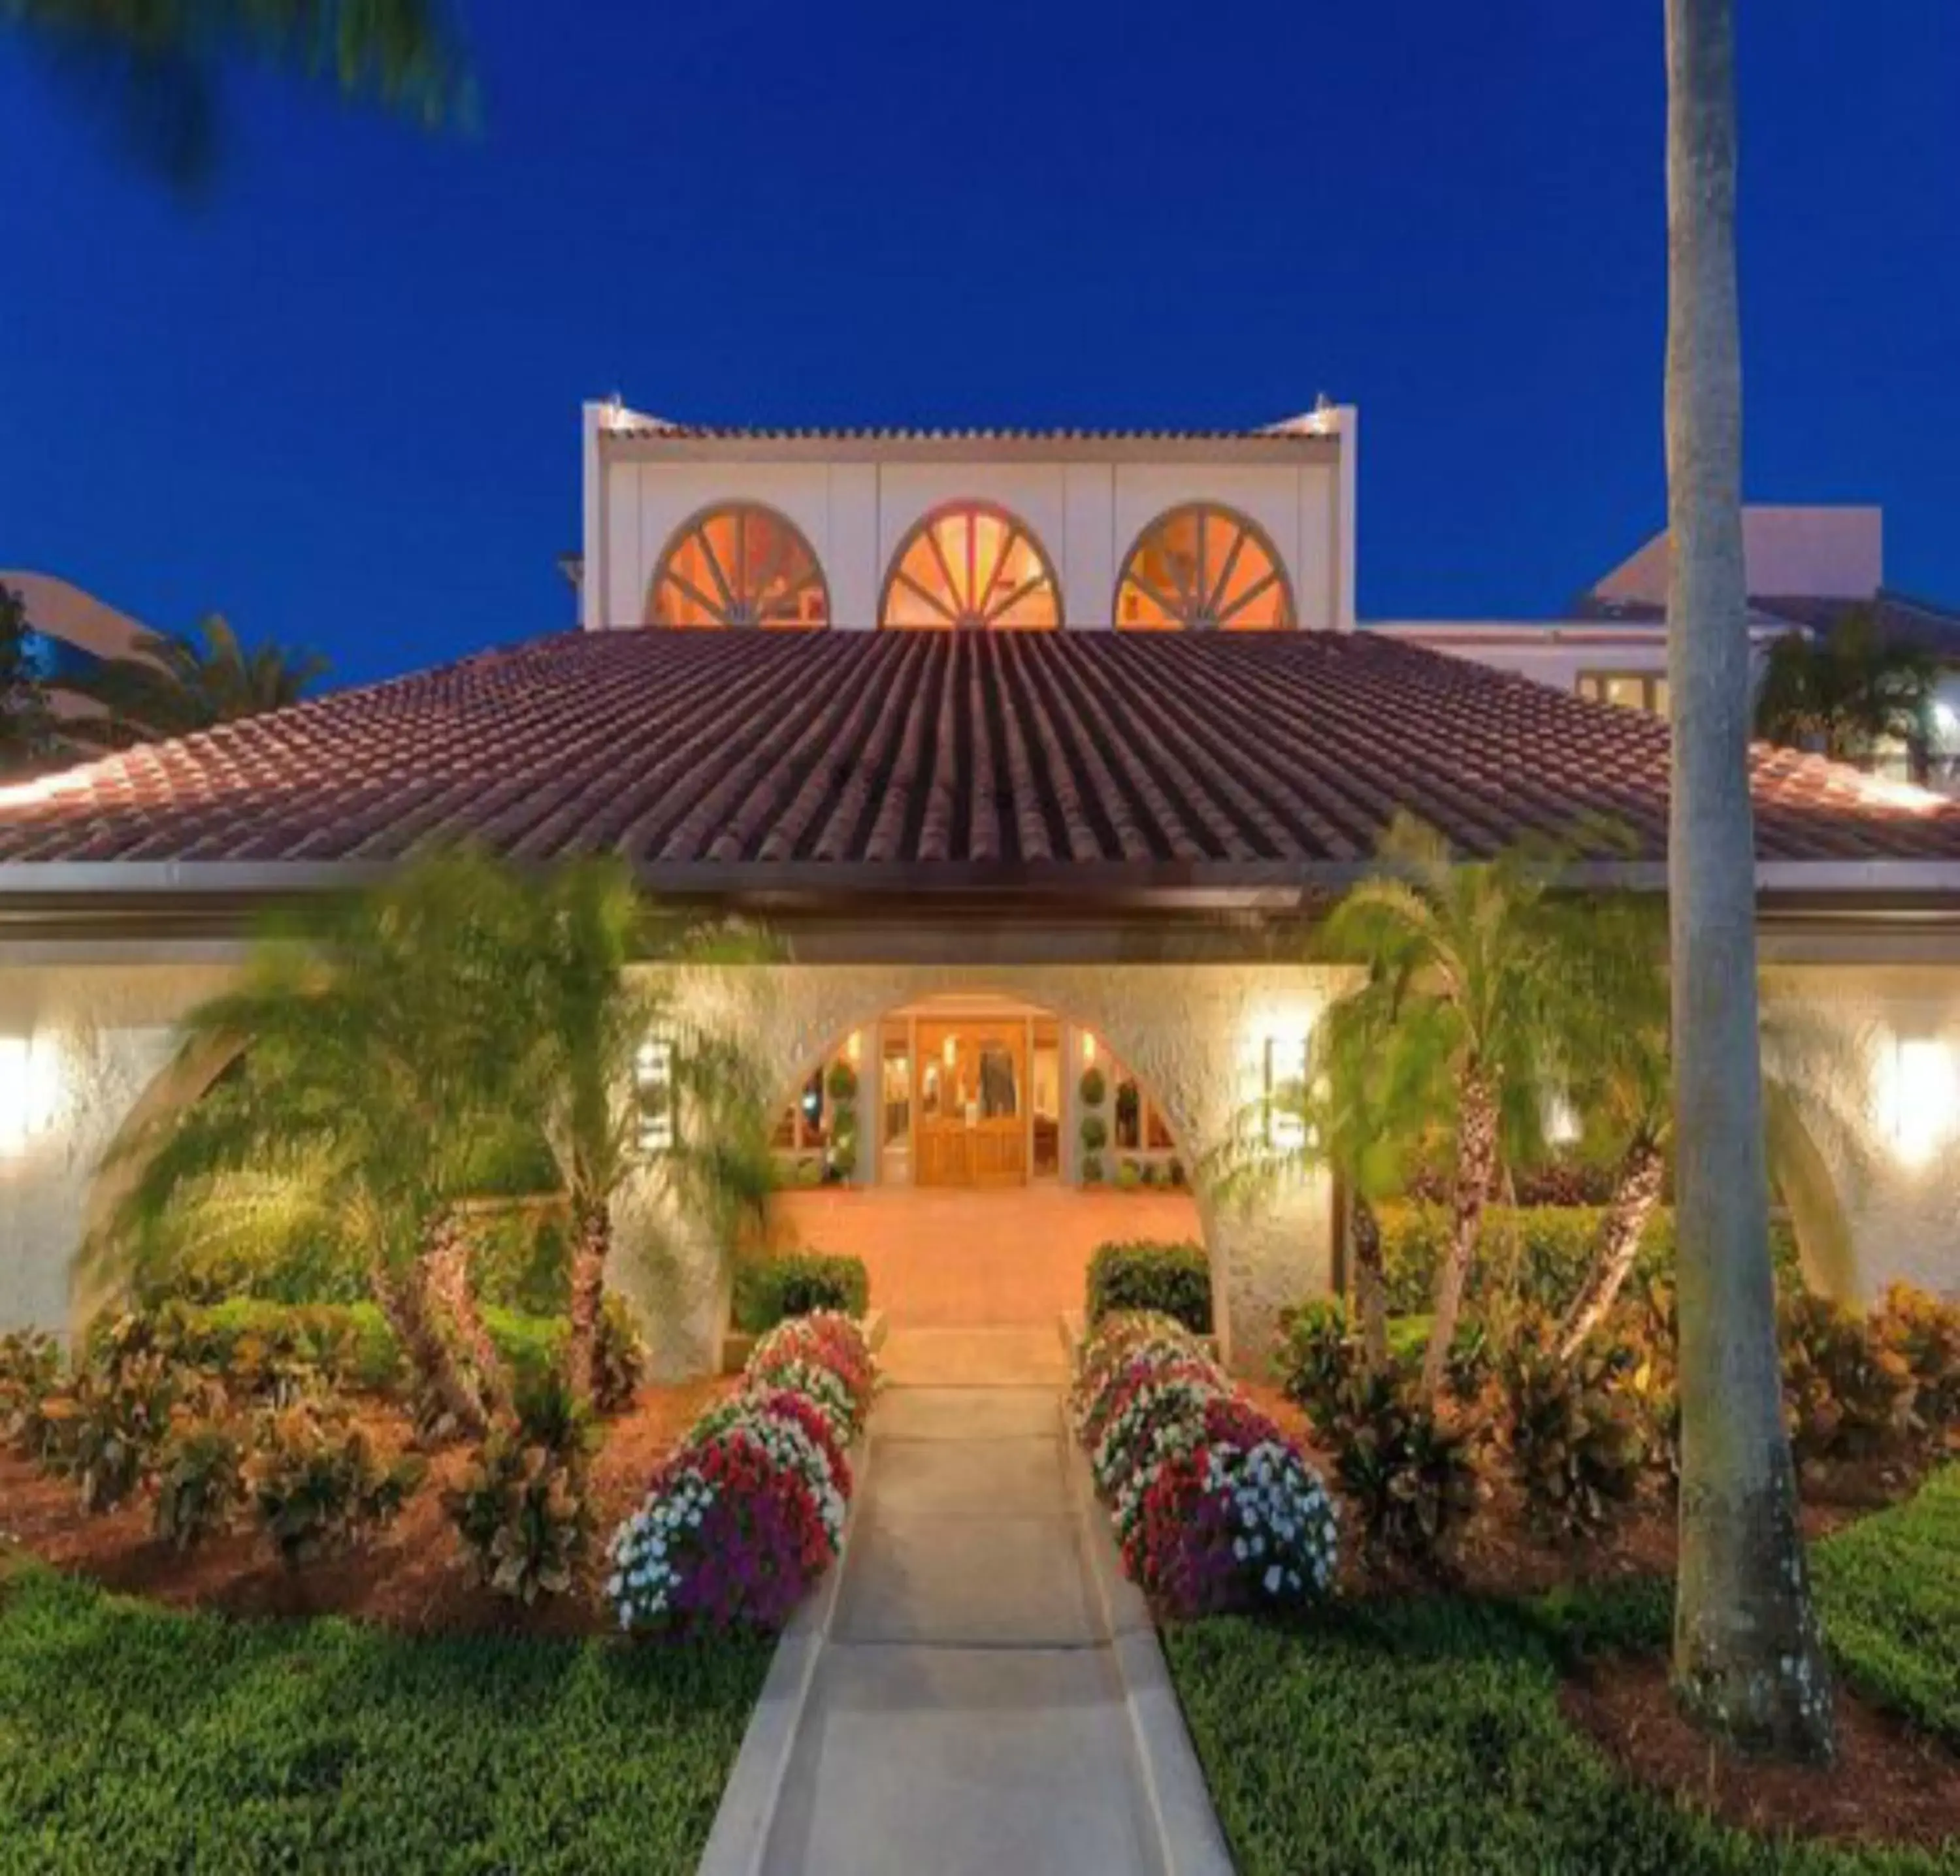 Area and facilities, Property Building in Wyndham Boca Raton Hotel